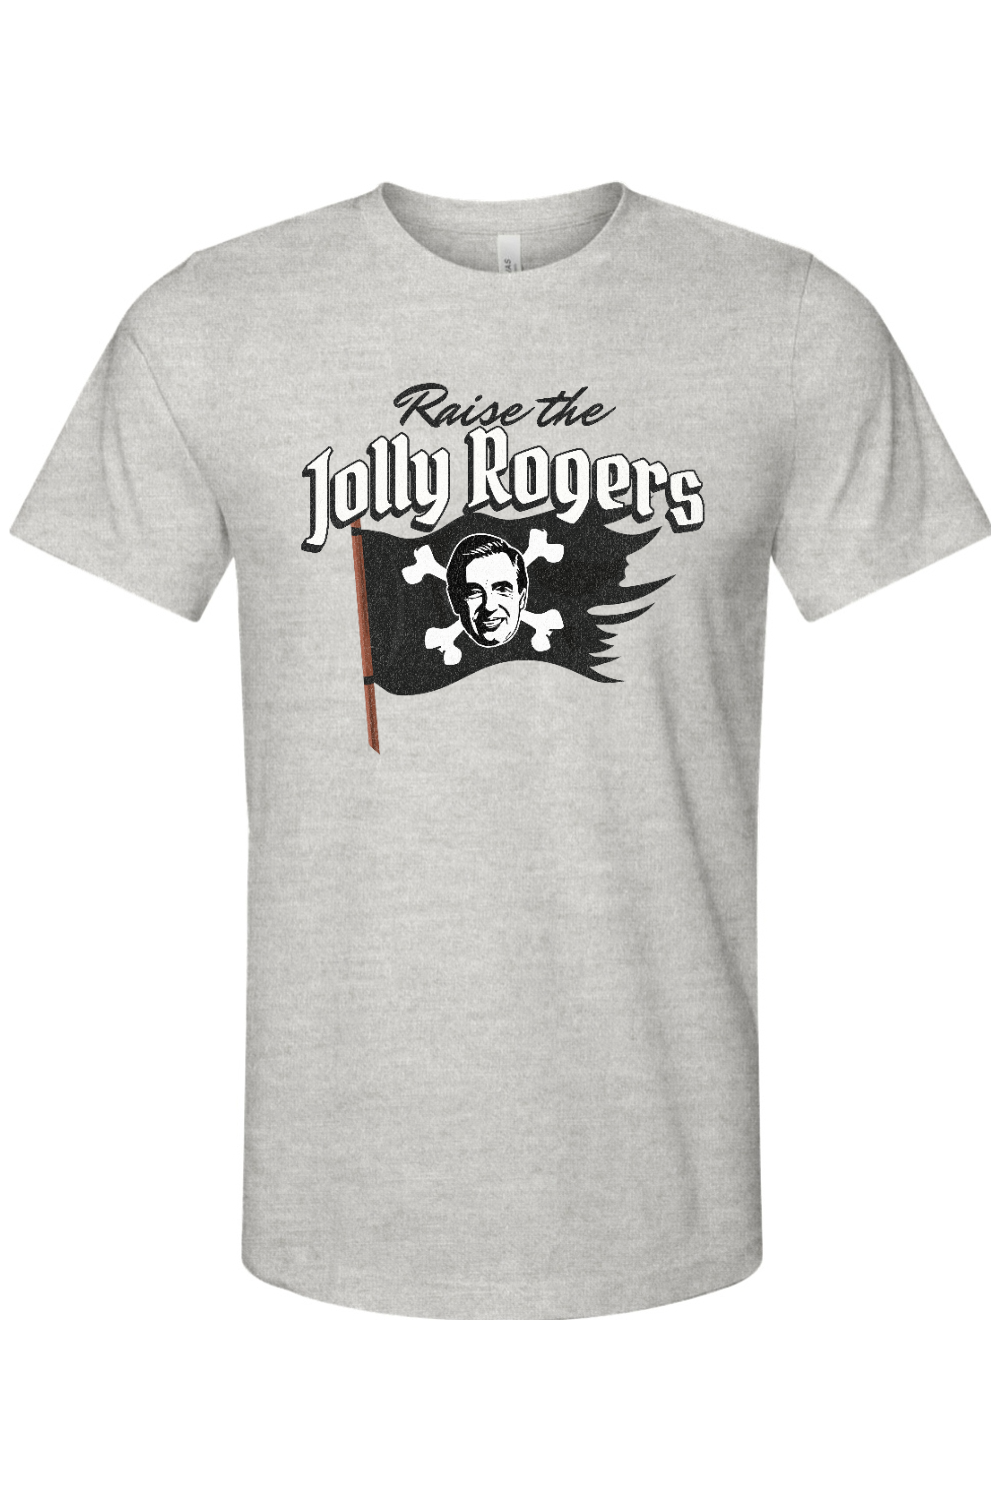 Print Your Cause Raise The Jolly Rogers Ash / XS